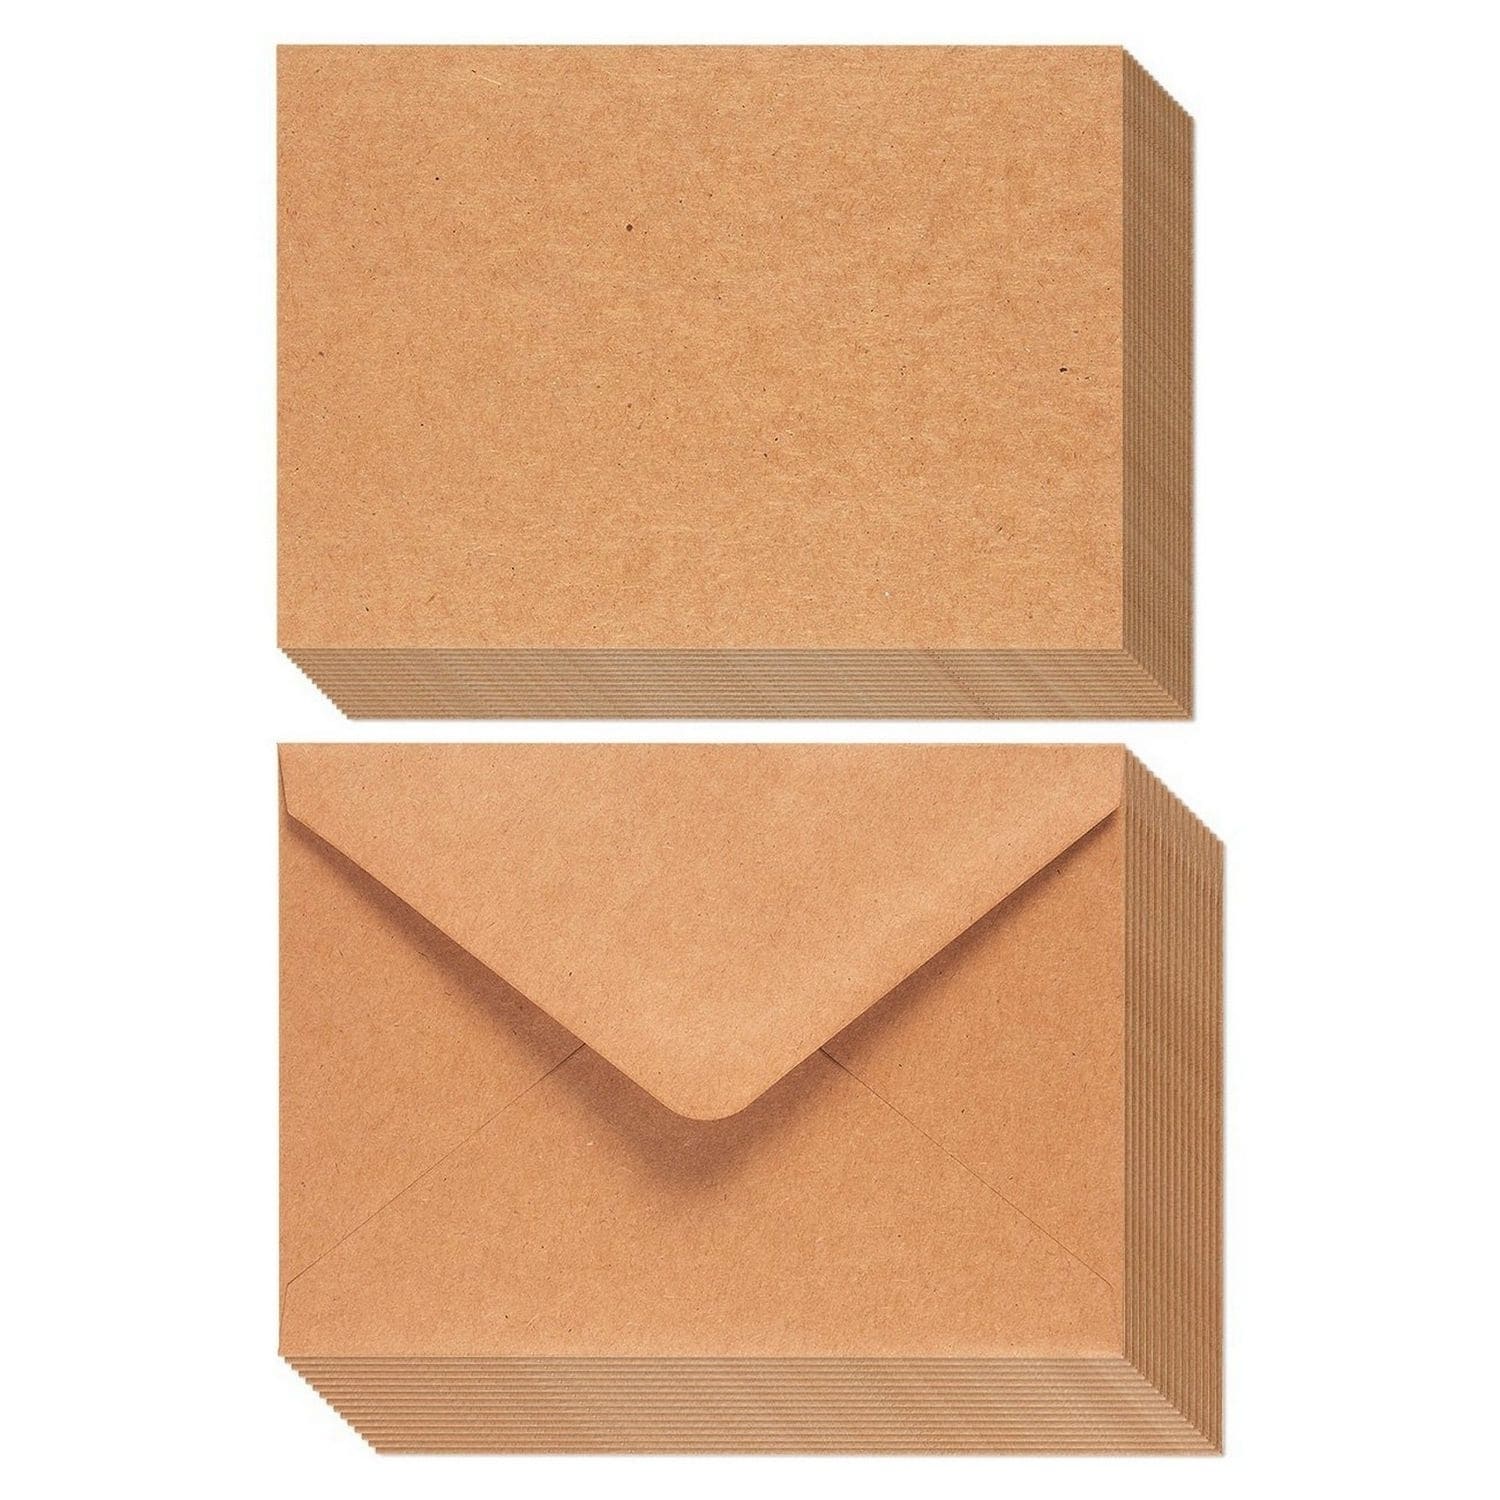 50-Count A7 Invitation Cards and Envelopes Set, Kraft for Weddings, Baby Showers